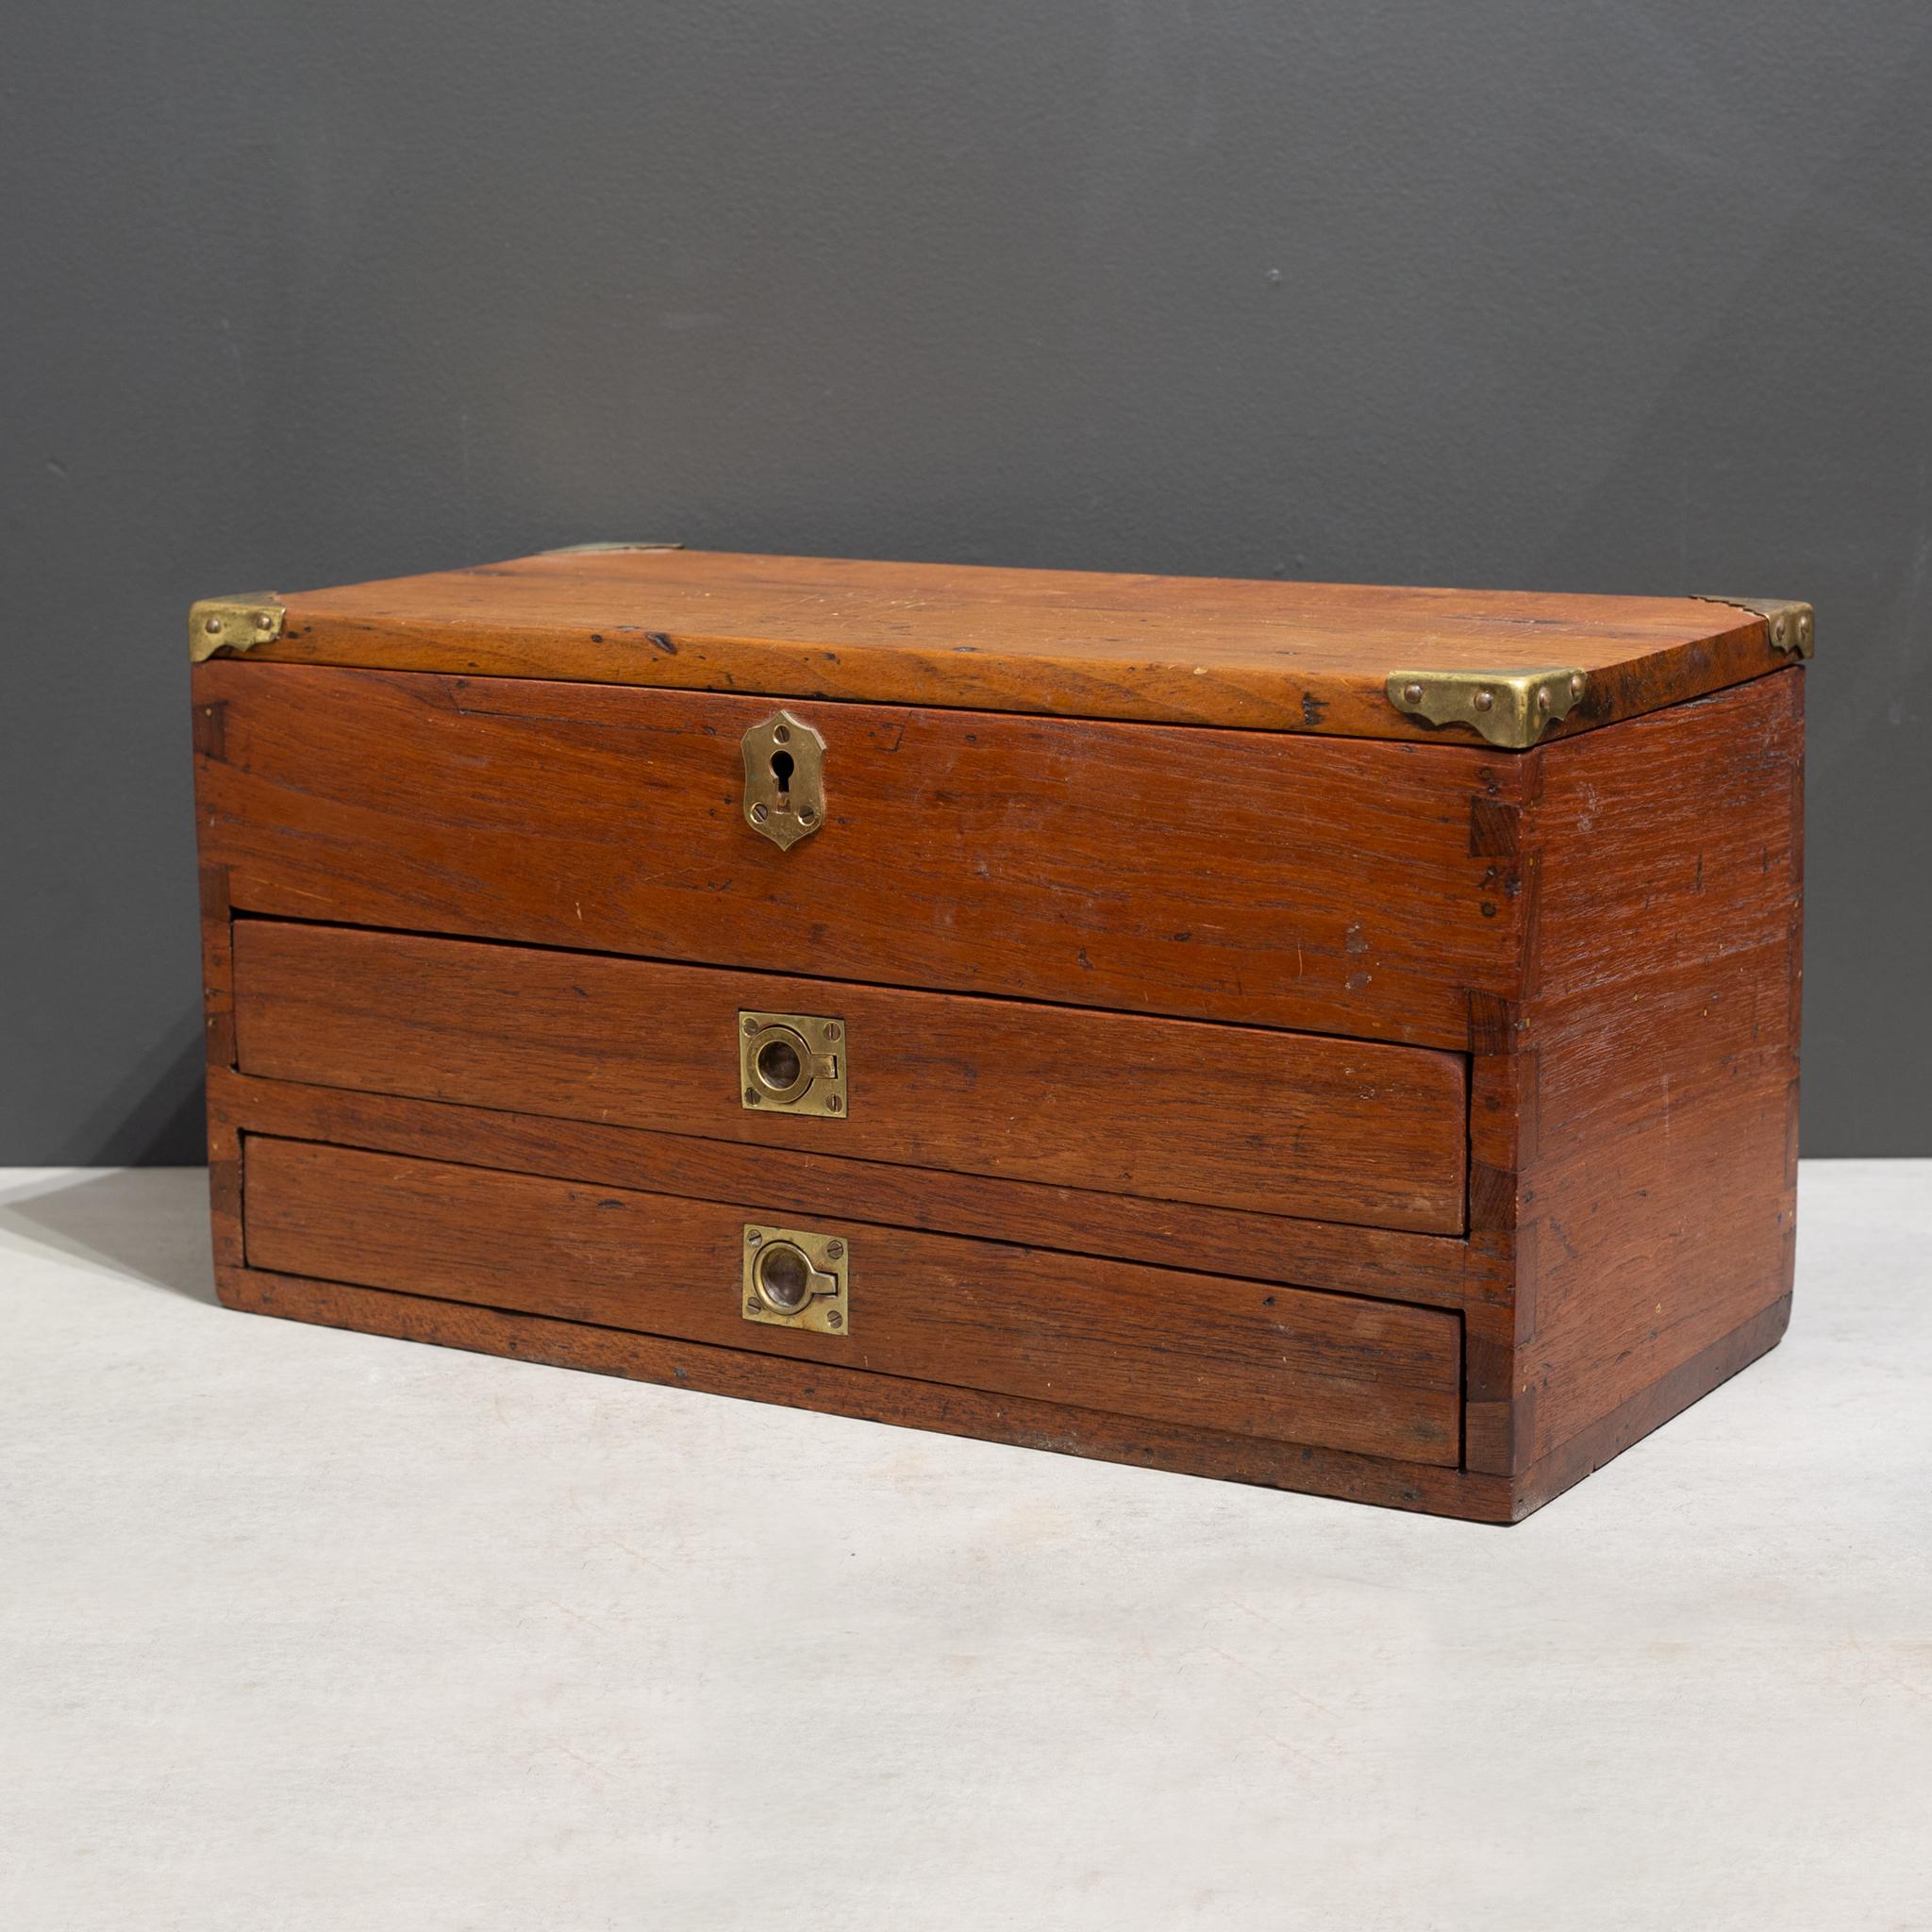 20th Century Antique Flip Top Oak and Brass Toolbox Chest, c.1910